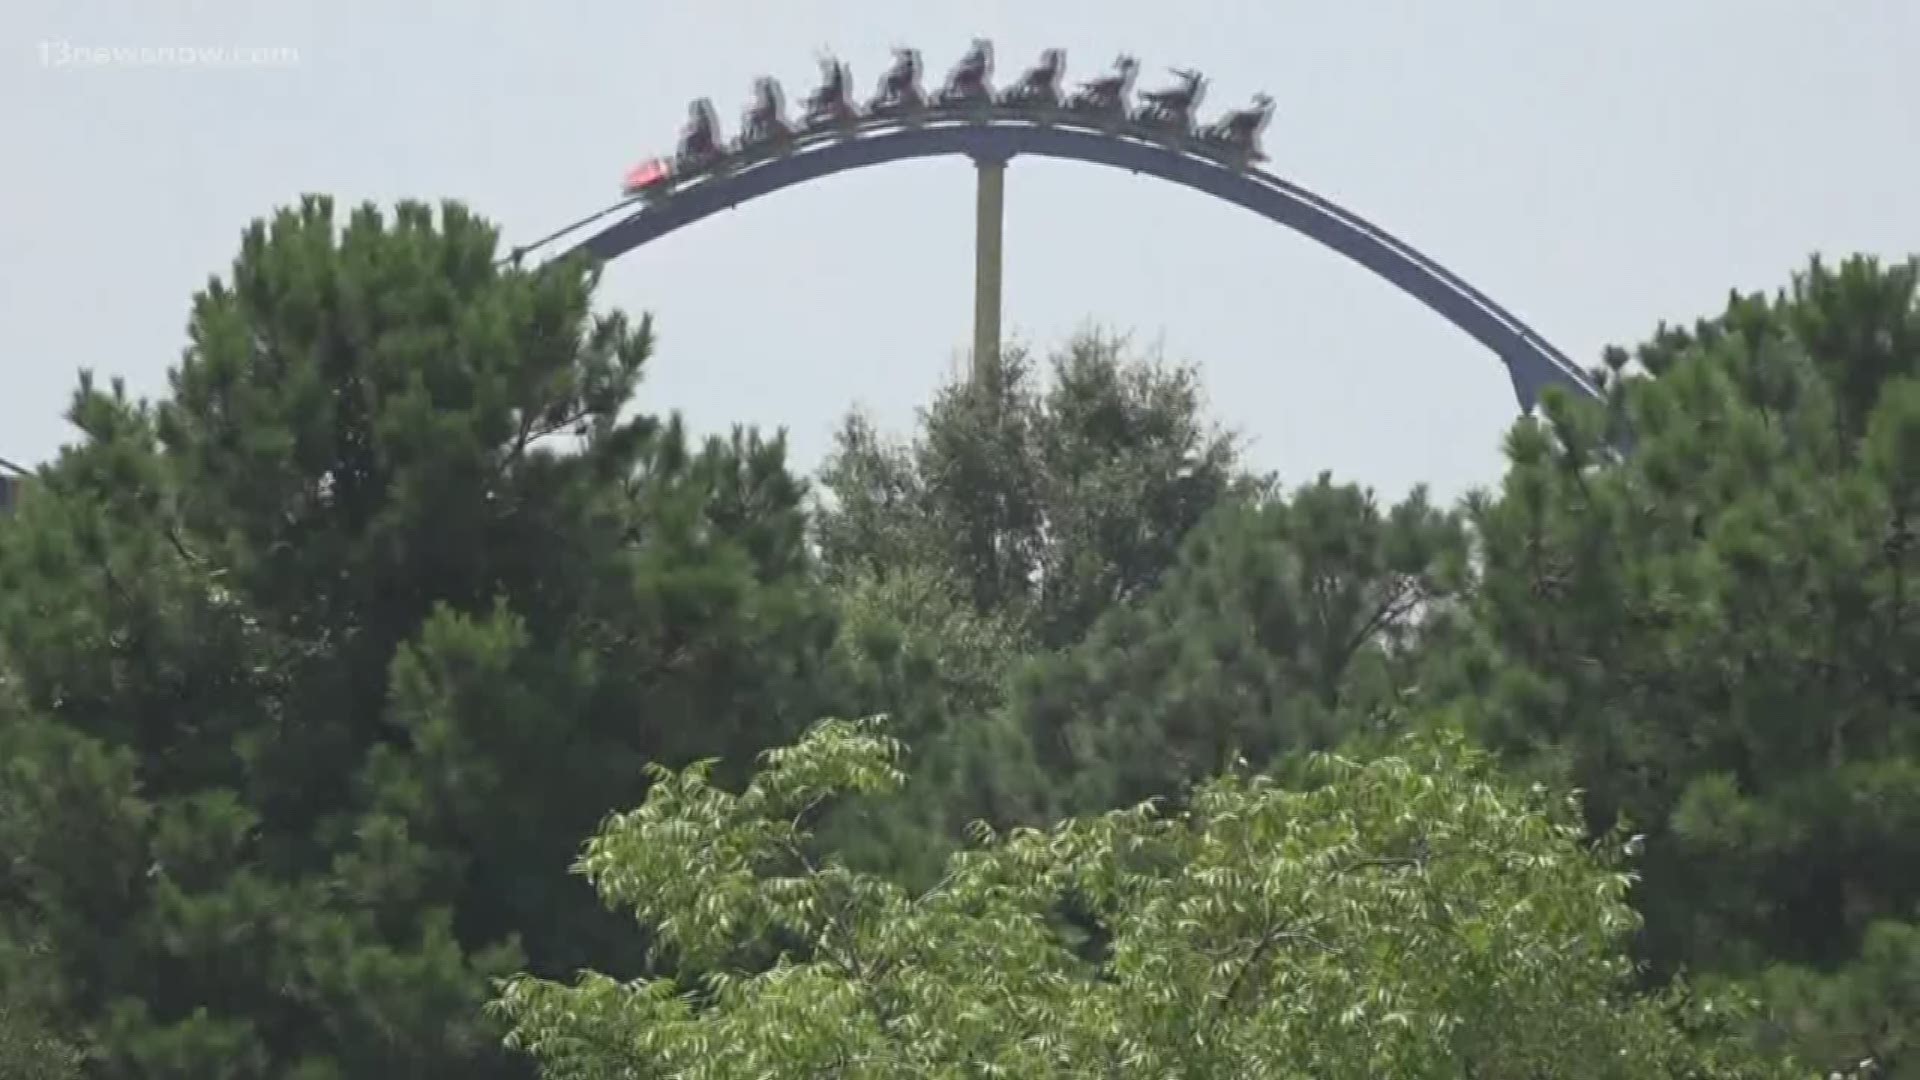 The James City County Board of Supervisors is expected to vote on a height waiver request for a new attraction at Busch Gardens.